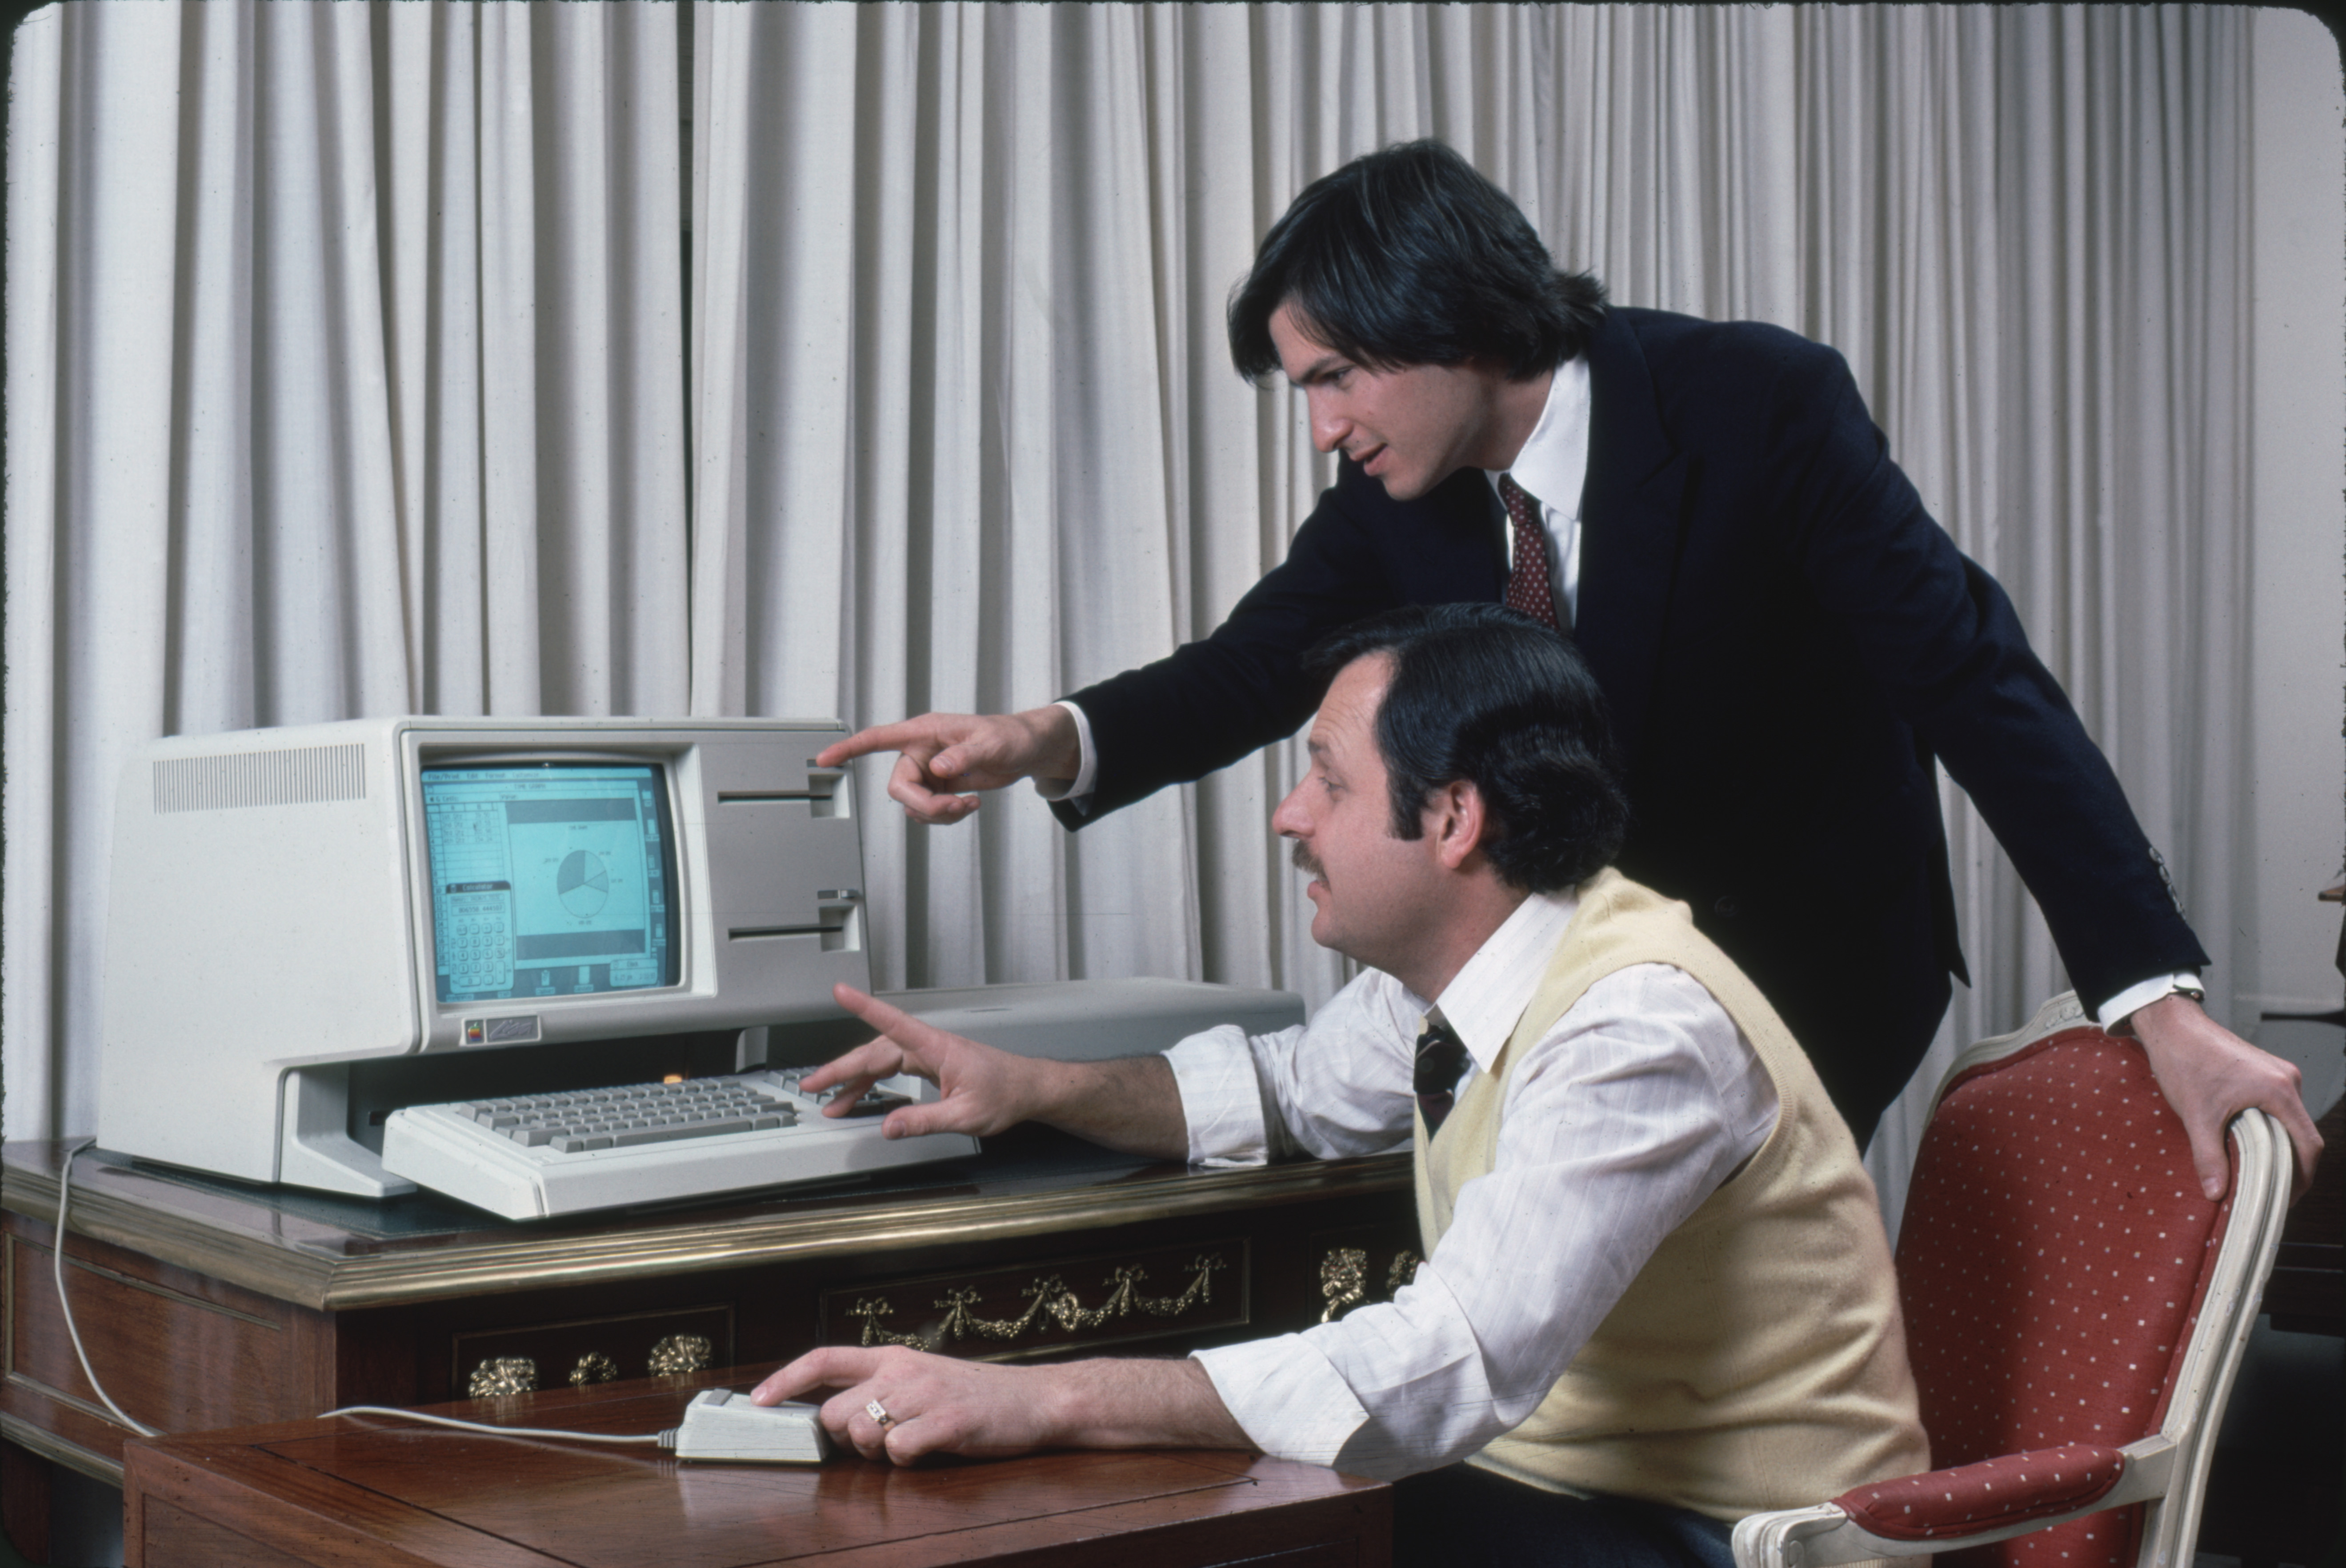 1983 Lisa was Apple's office computer that was the first personal computer to use a graphical user interface. It was a commercial flop, largely because it retailed for a whopping $10,000.